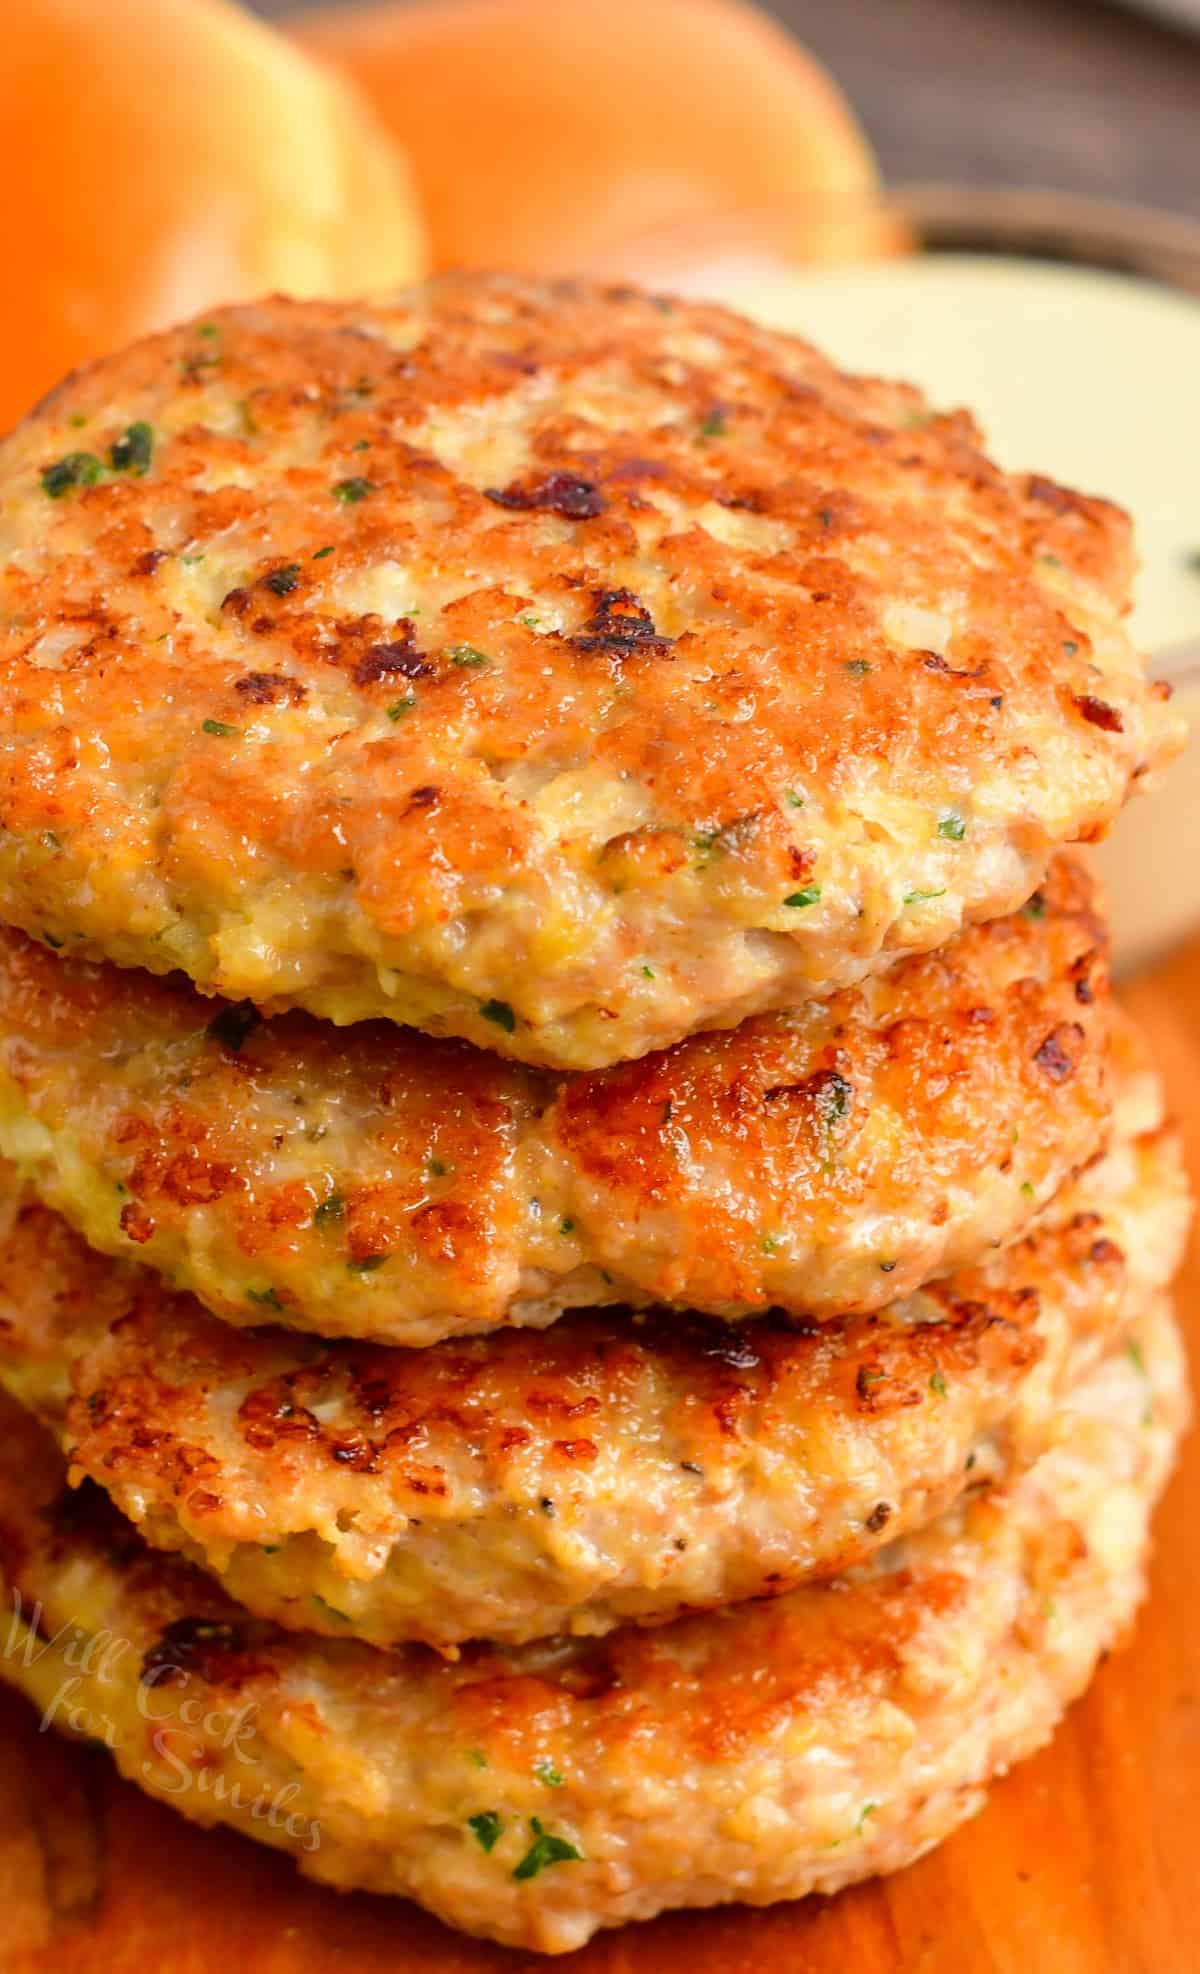 four juicy chicken burger patties stacked on top of each other.